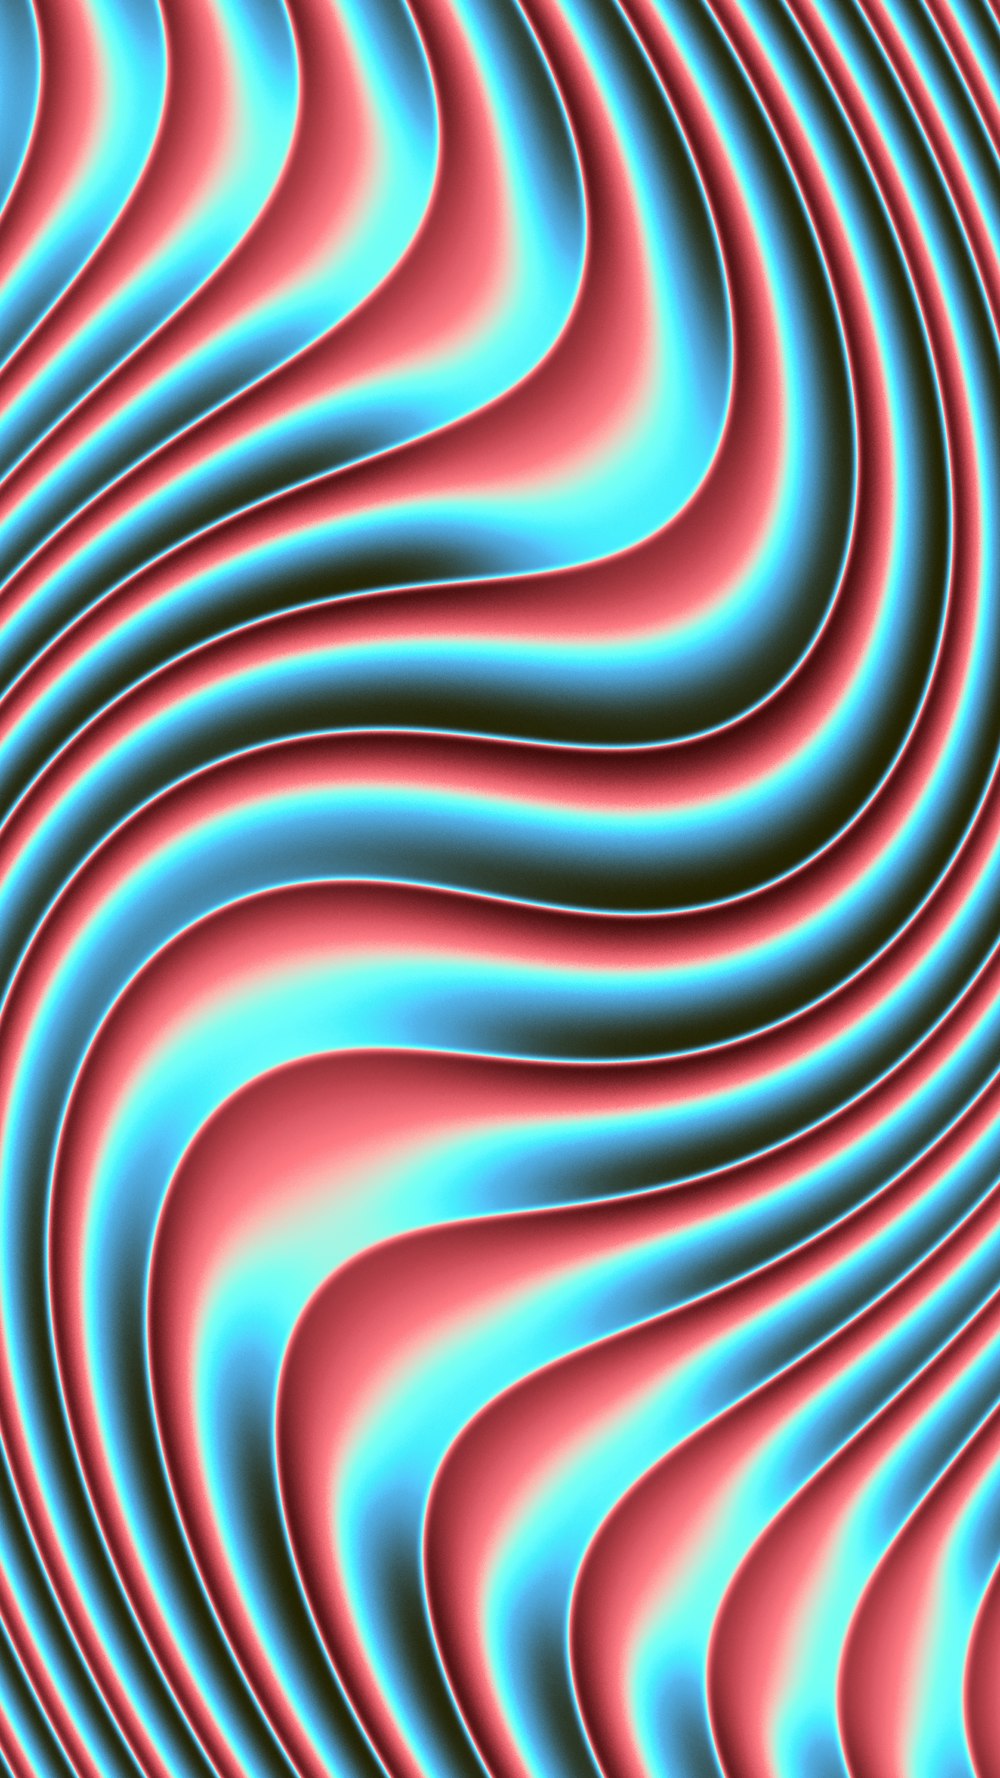 a computer generated image of a blue and red swirl